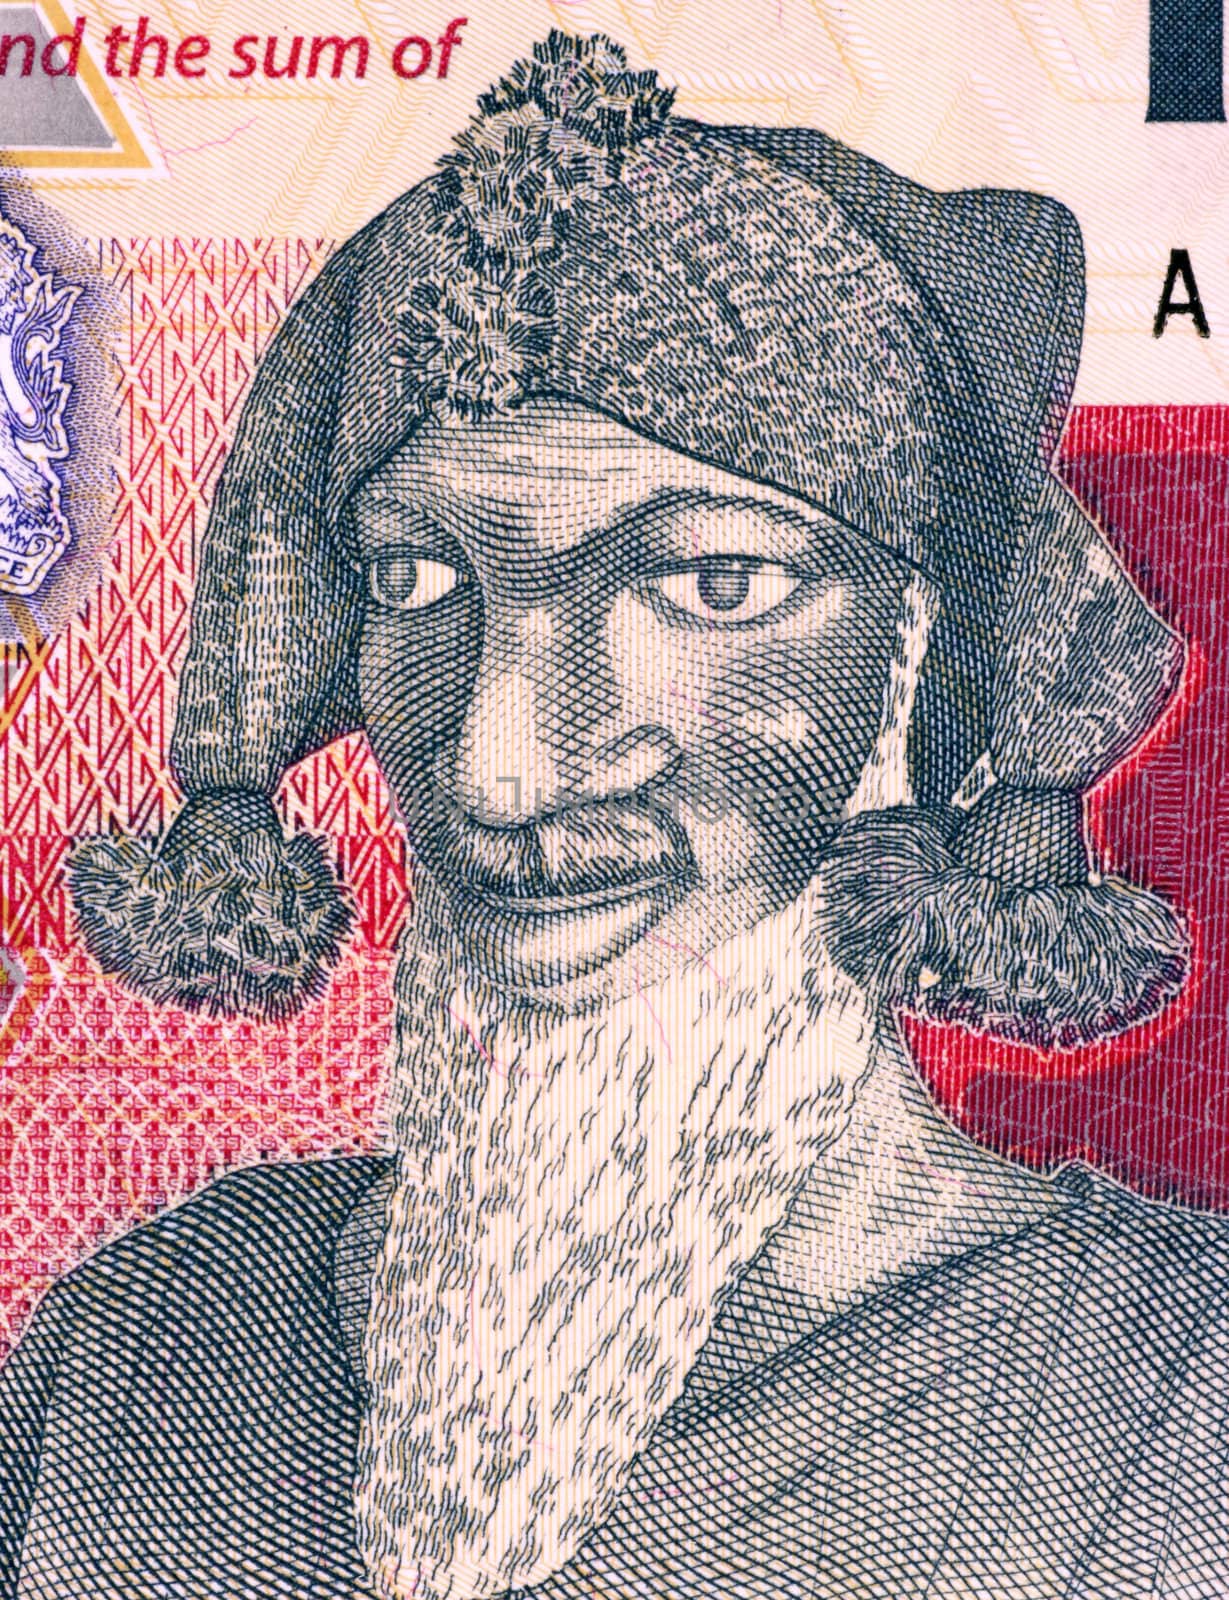 Bai Bureh (1940-1908) on 1000 Leones 2010 Banknote from Sierra Leone. Sierra Leonean ruler and military strategist who led the Temne and Loko uprising against British rule in 1898.